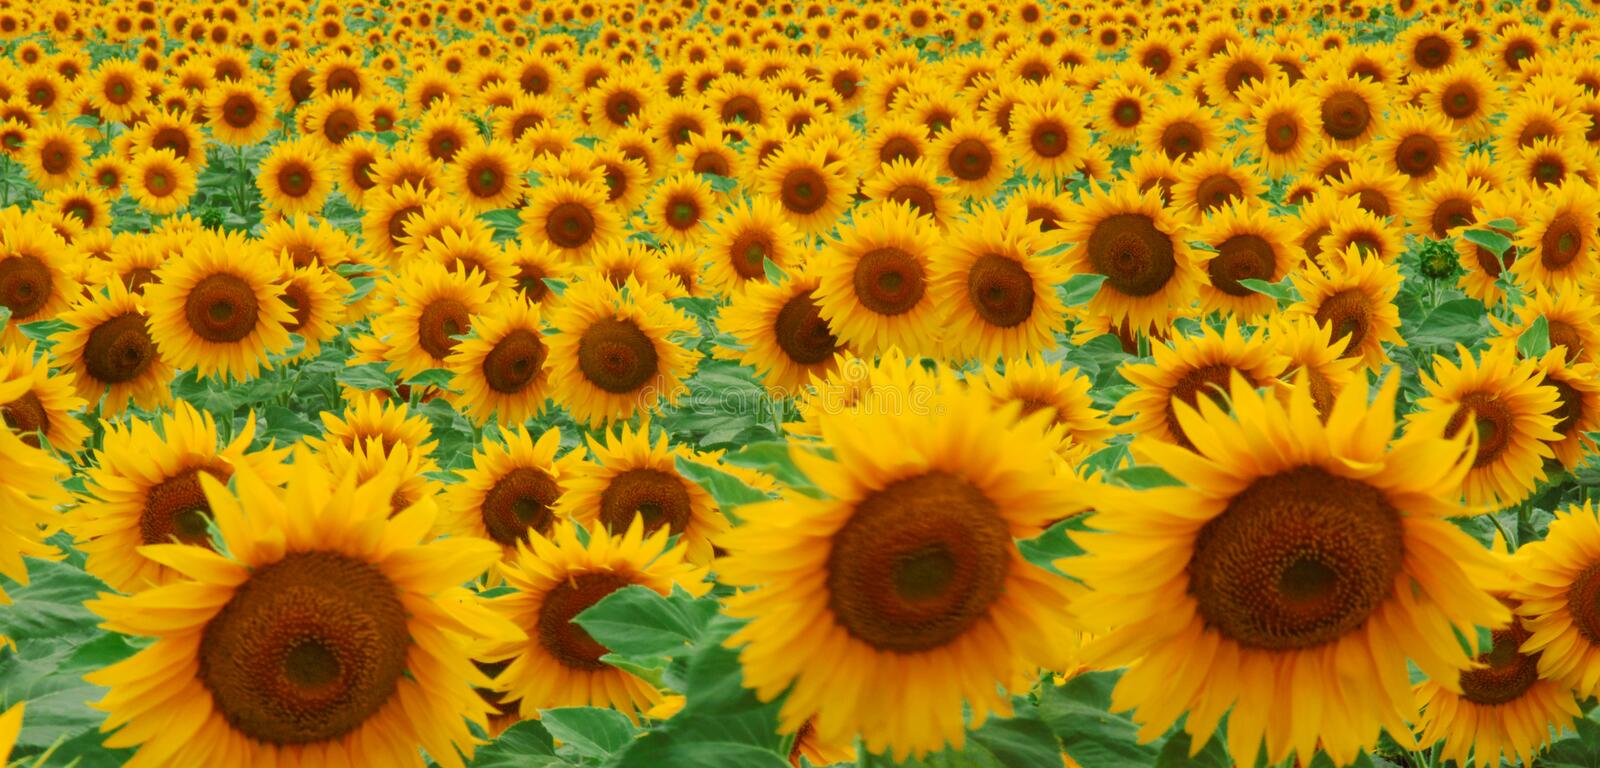 Detail Sunflower Images Gallery Nomer 35